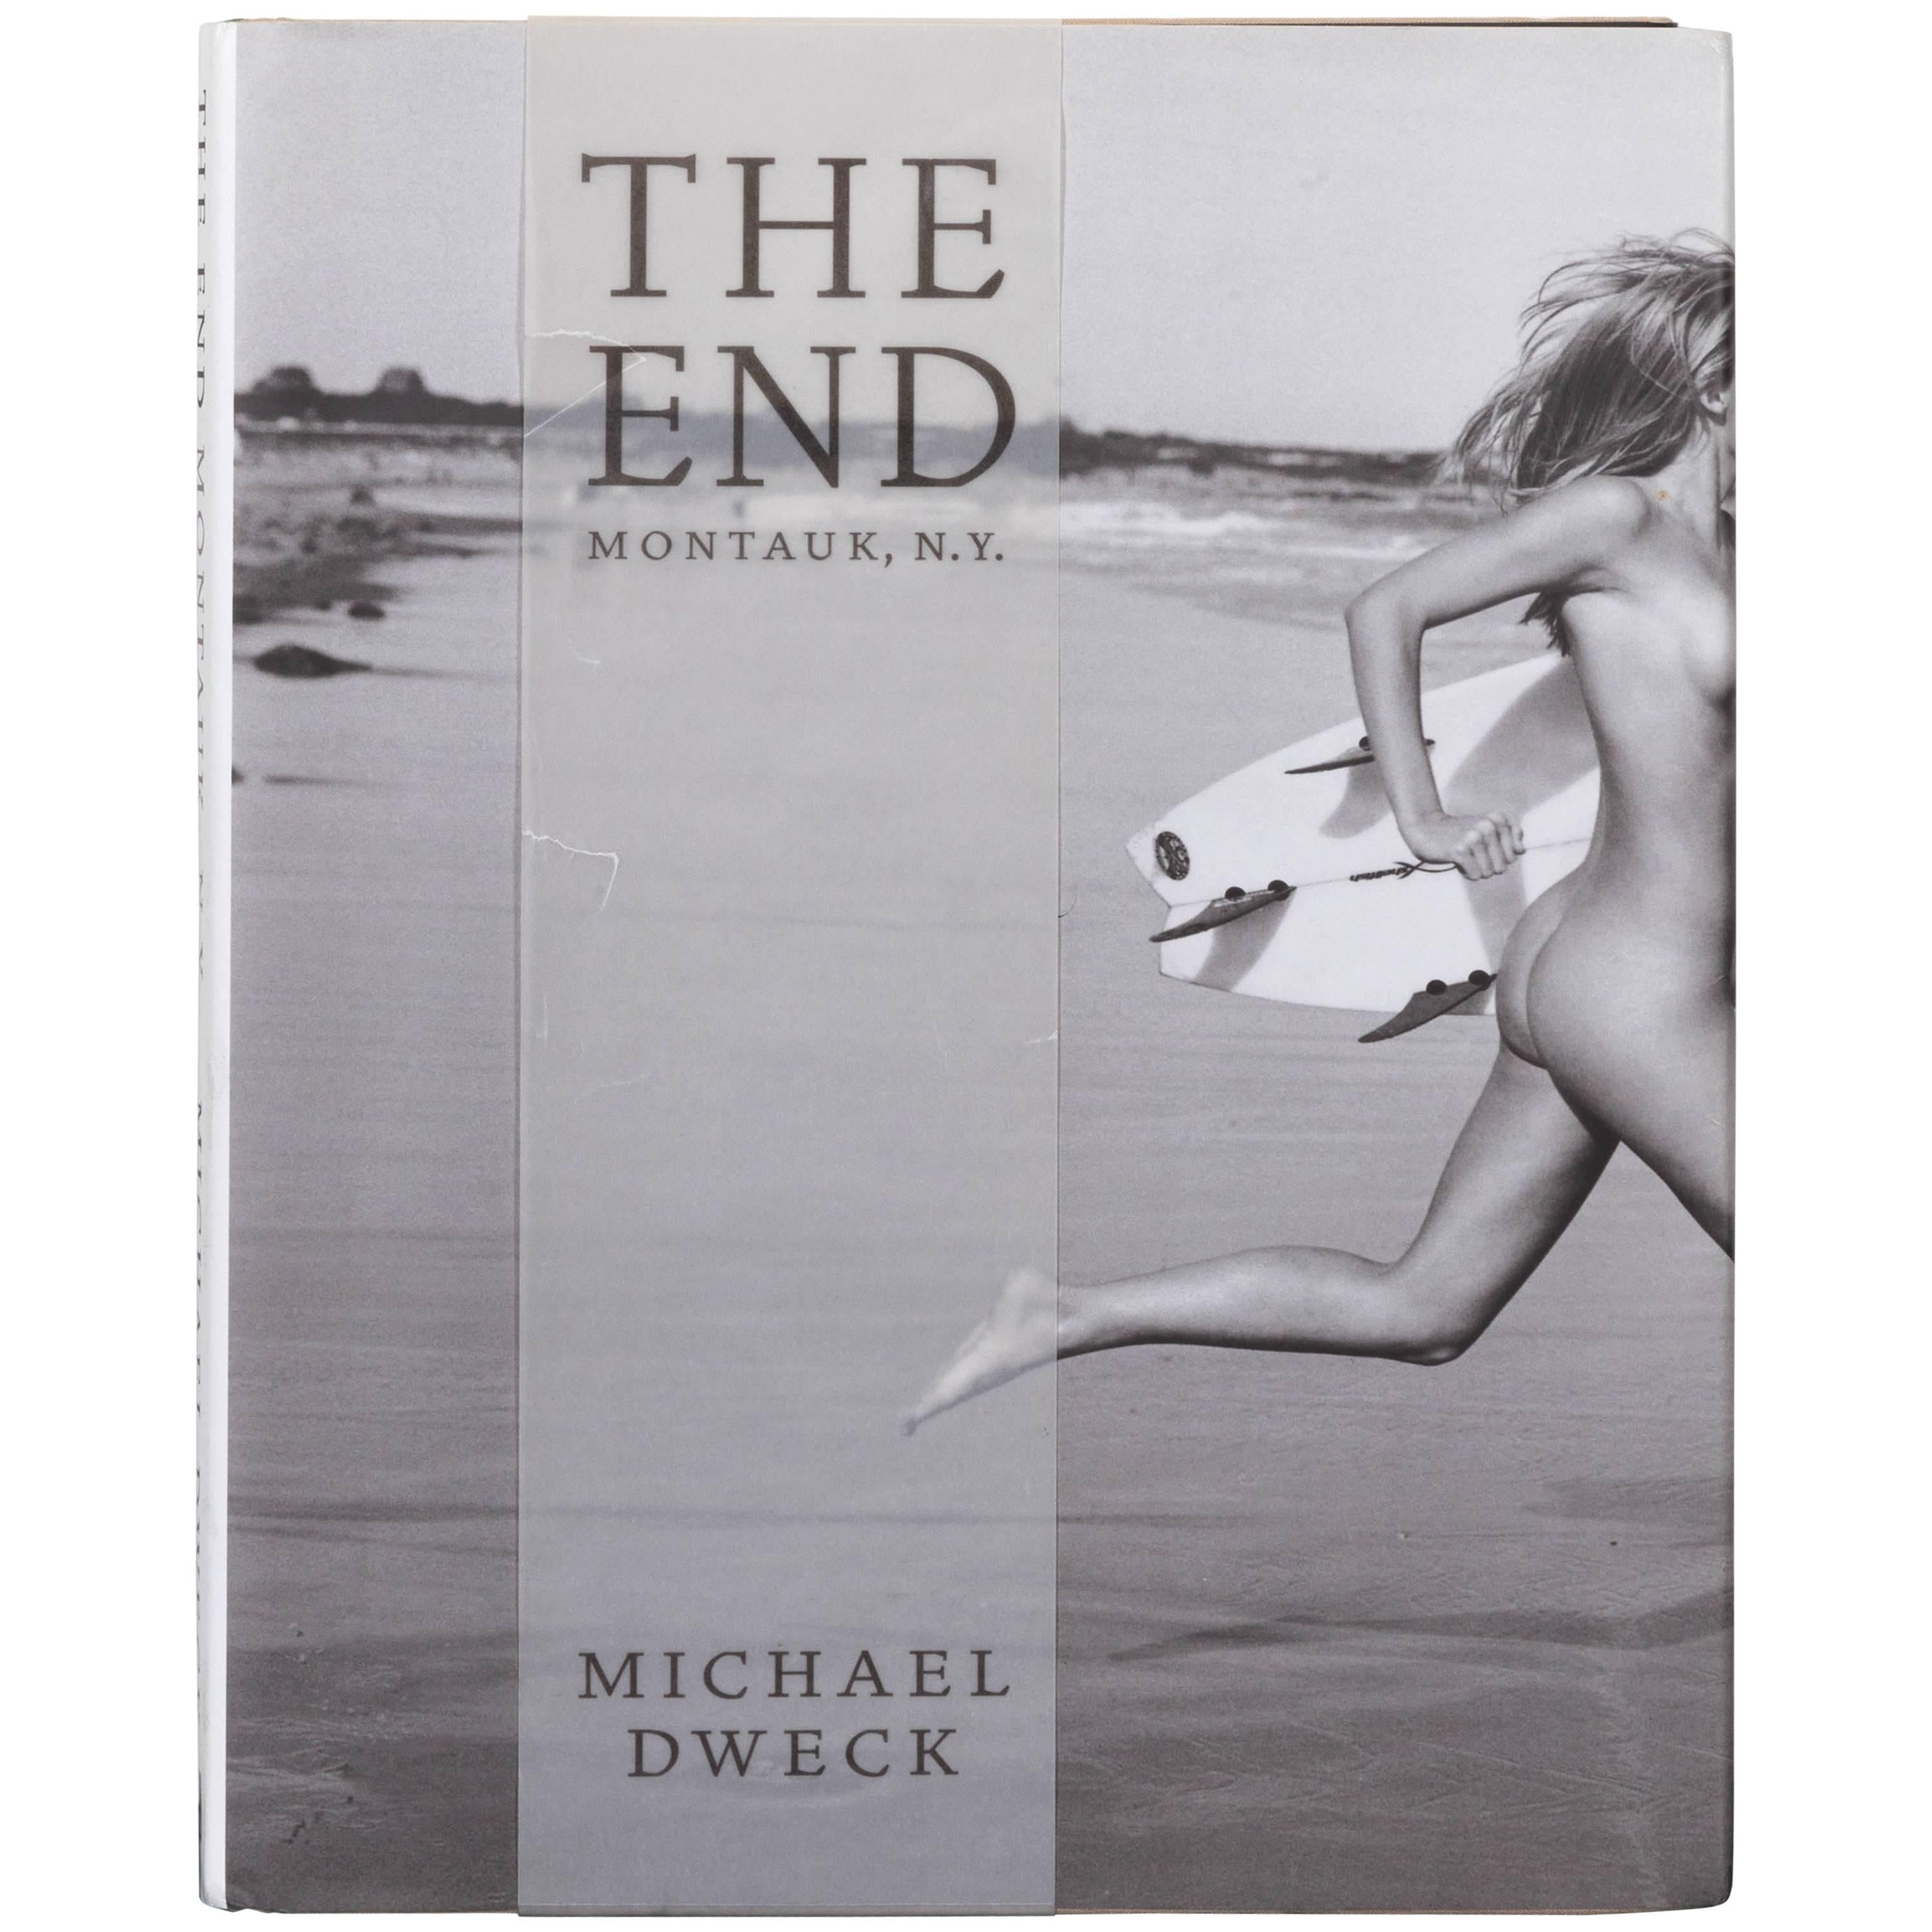 1st Edition "The End" Montauk, N.Y. by Michael Dweck For Sale